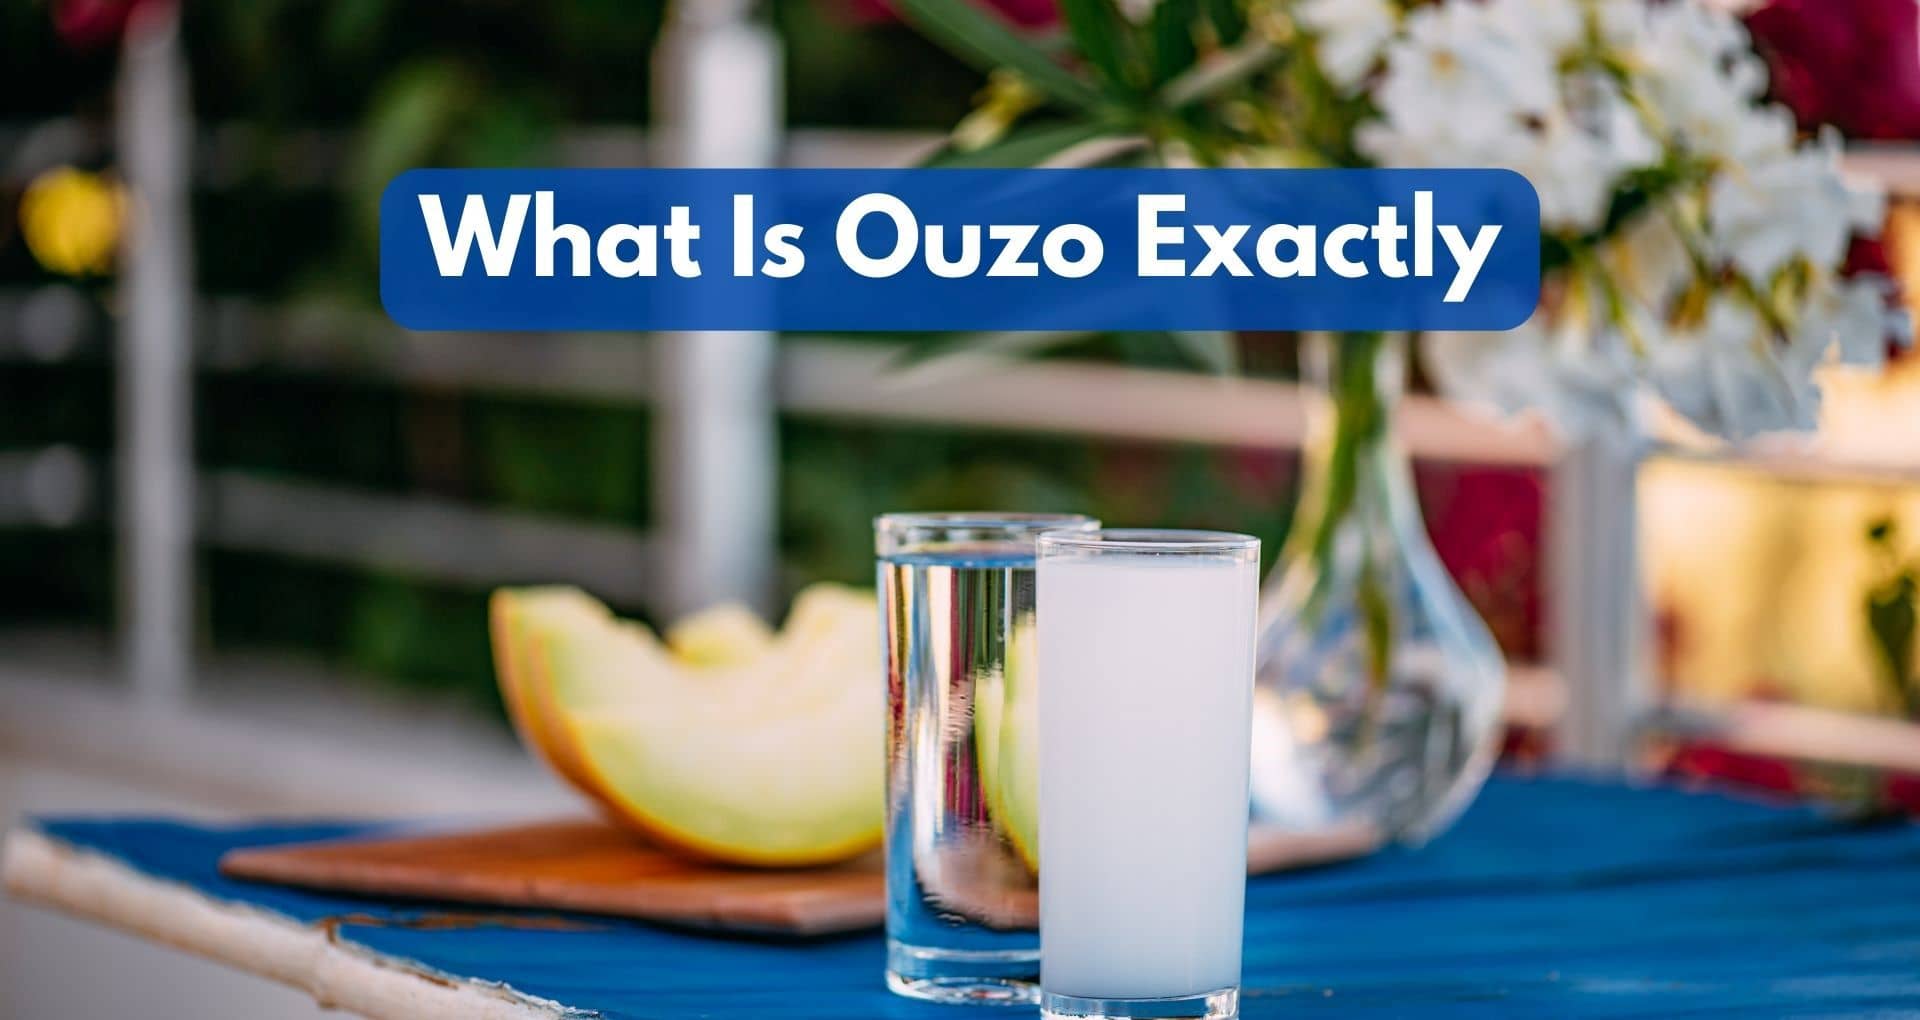 What Is Ouzo Exactly?